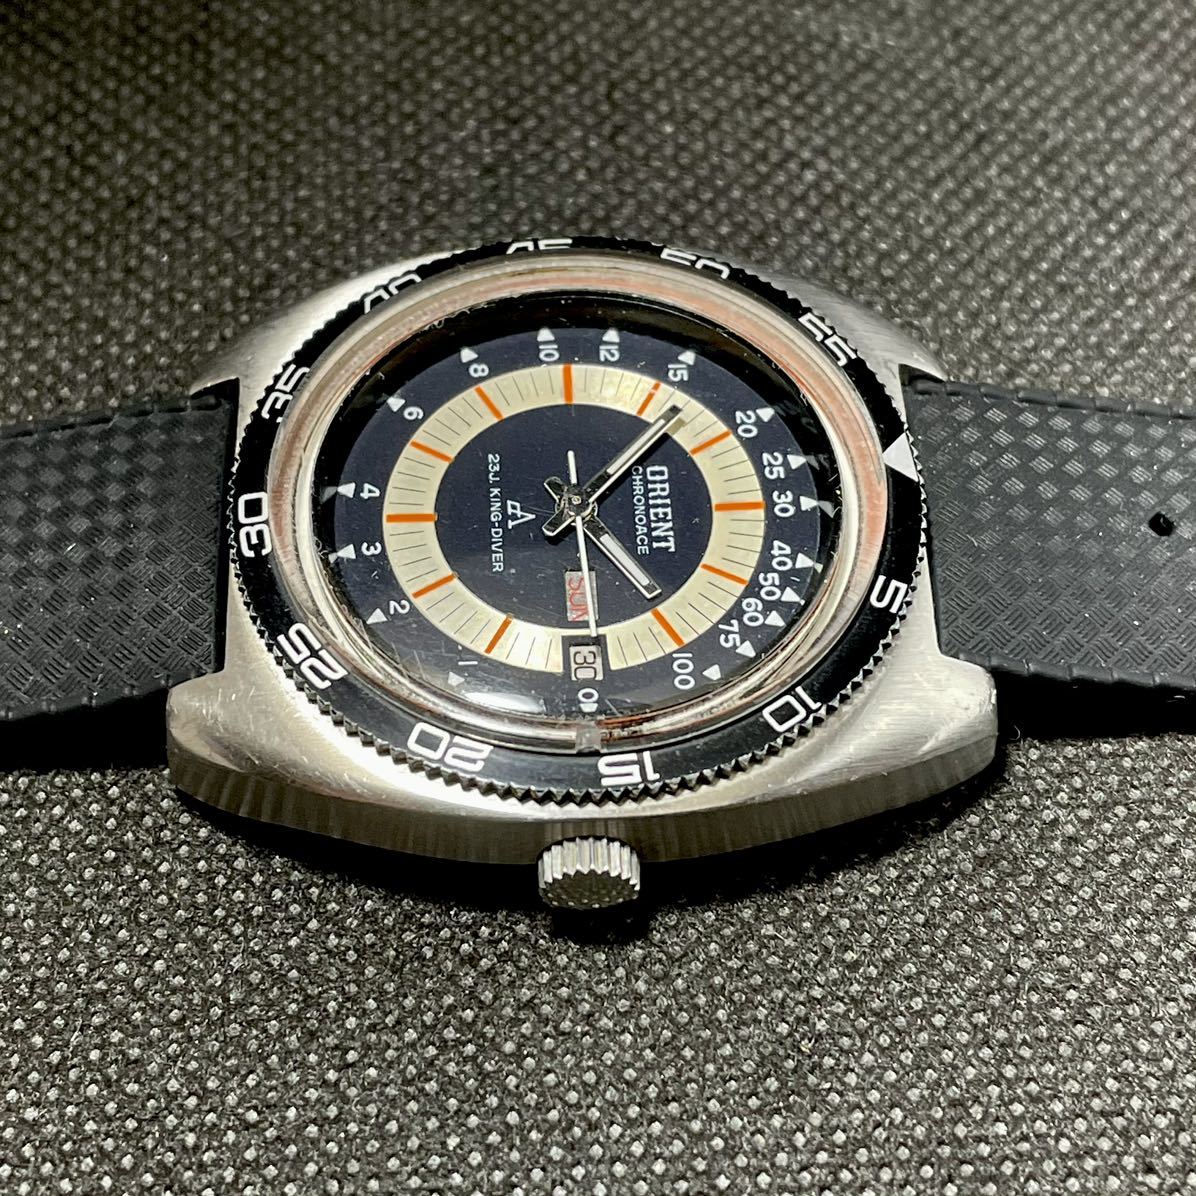  Orient Chrono Ace water deep total attaching King diver ( has overhauled )